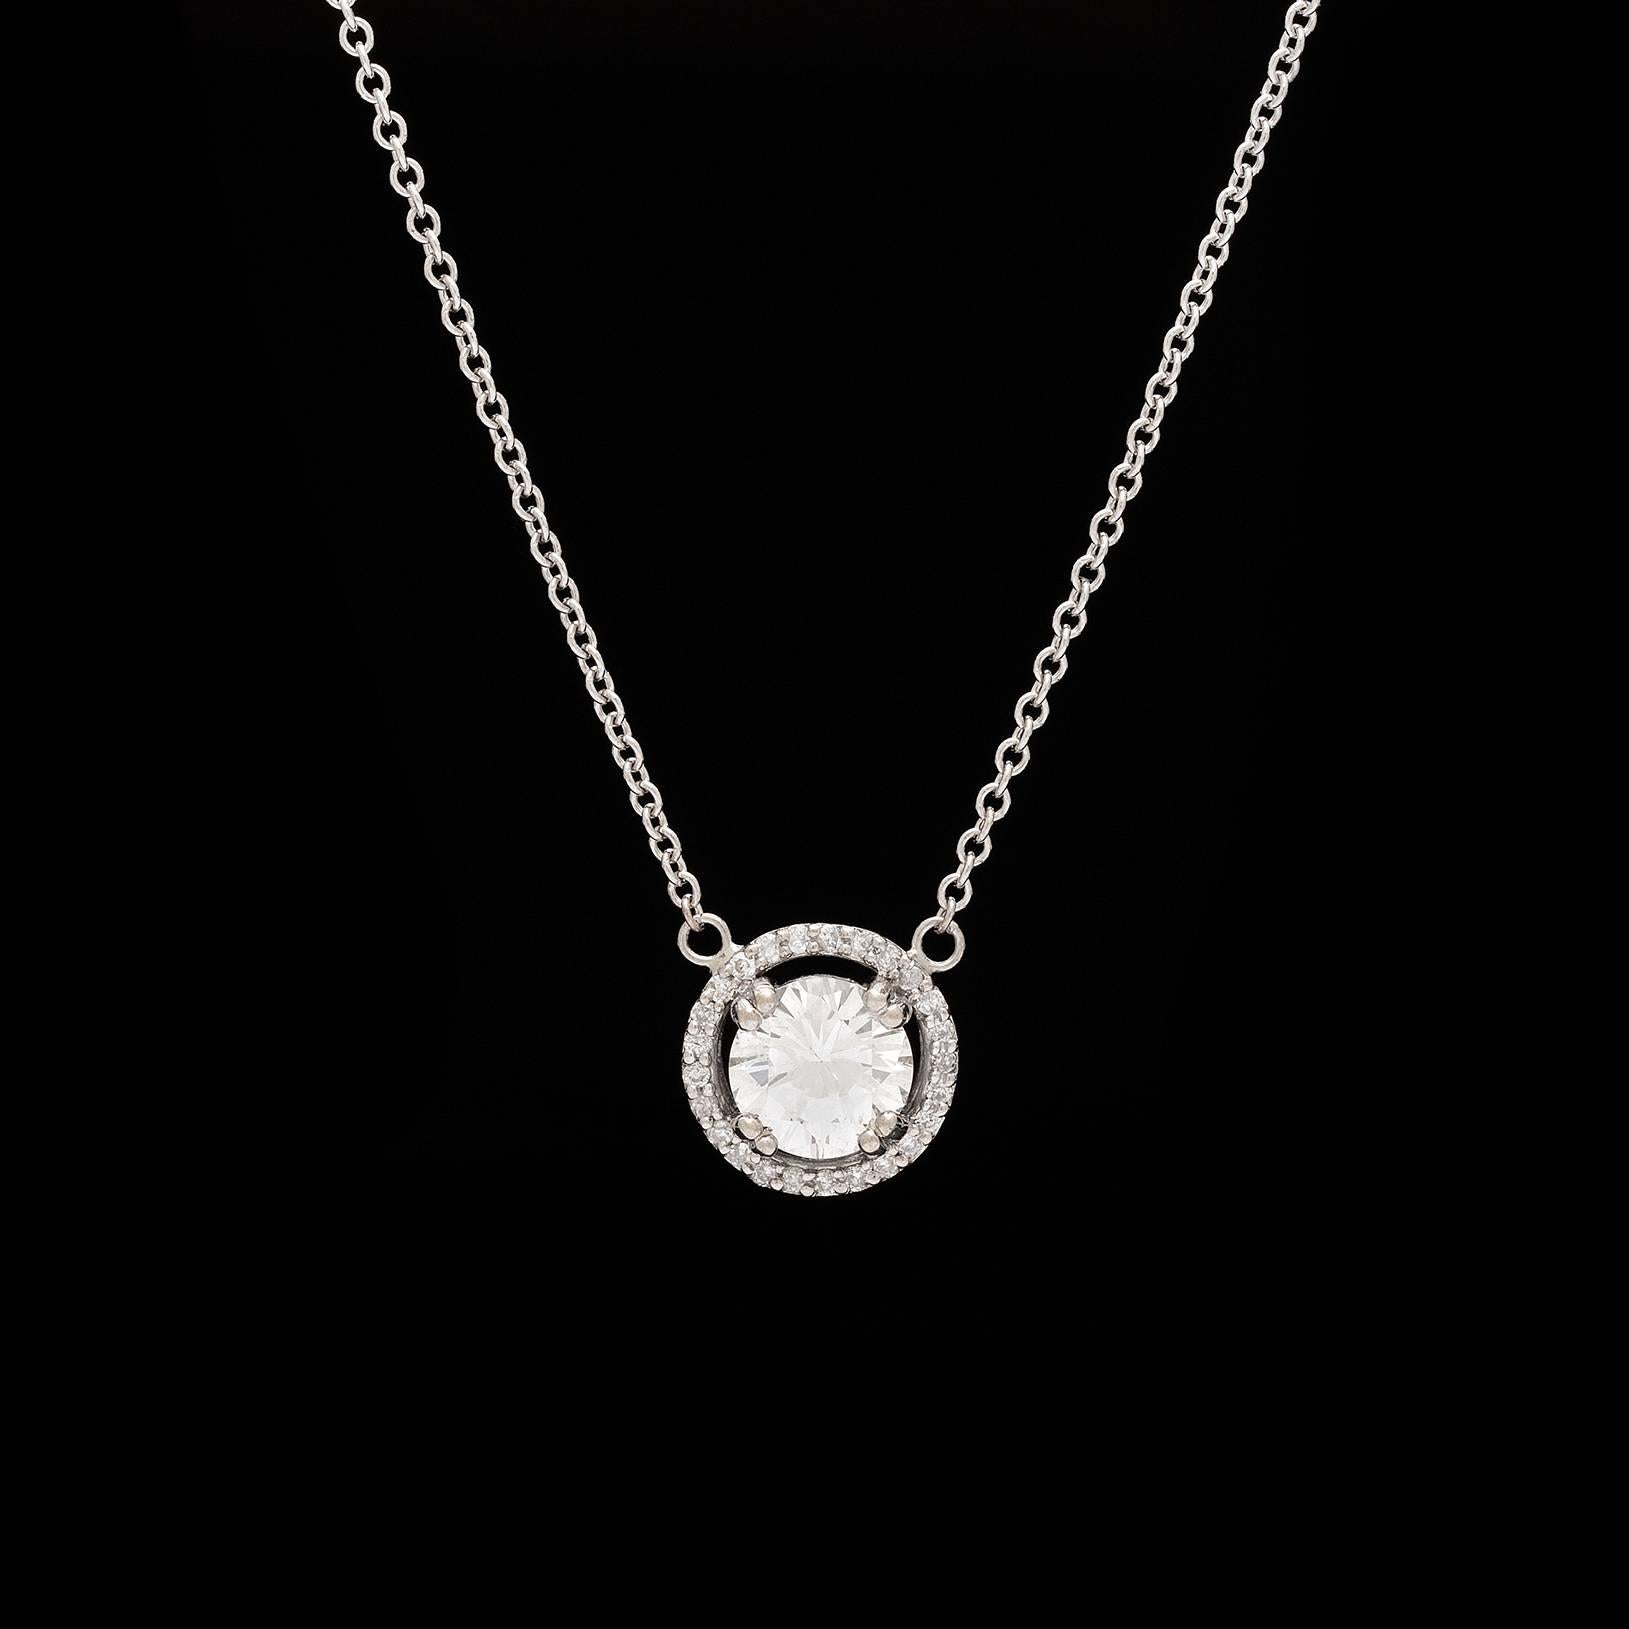 This 18k white gold diamond halo design pendant features a 0.95 carat round brilliant-cut diamond surrounded by 25 full-cut diamonds totaling 0.10 carats, with a length of 16 inches. The center diamond is G-H-I color and SI clarity. Nice added